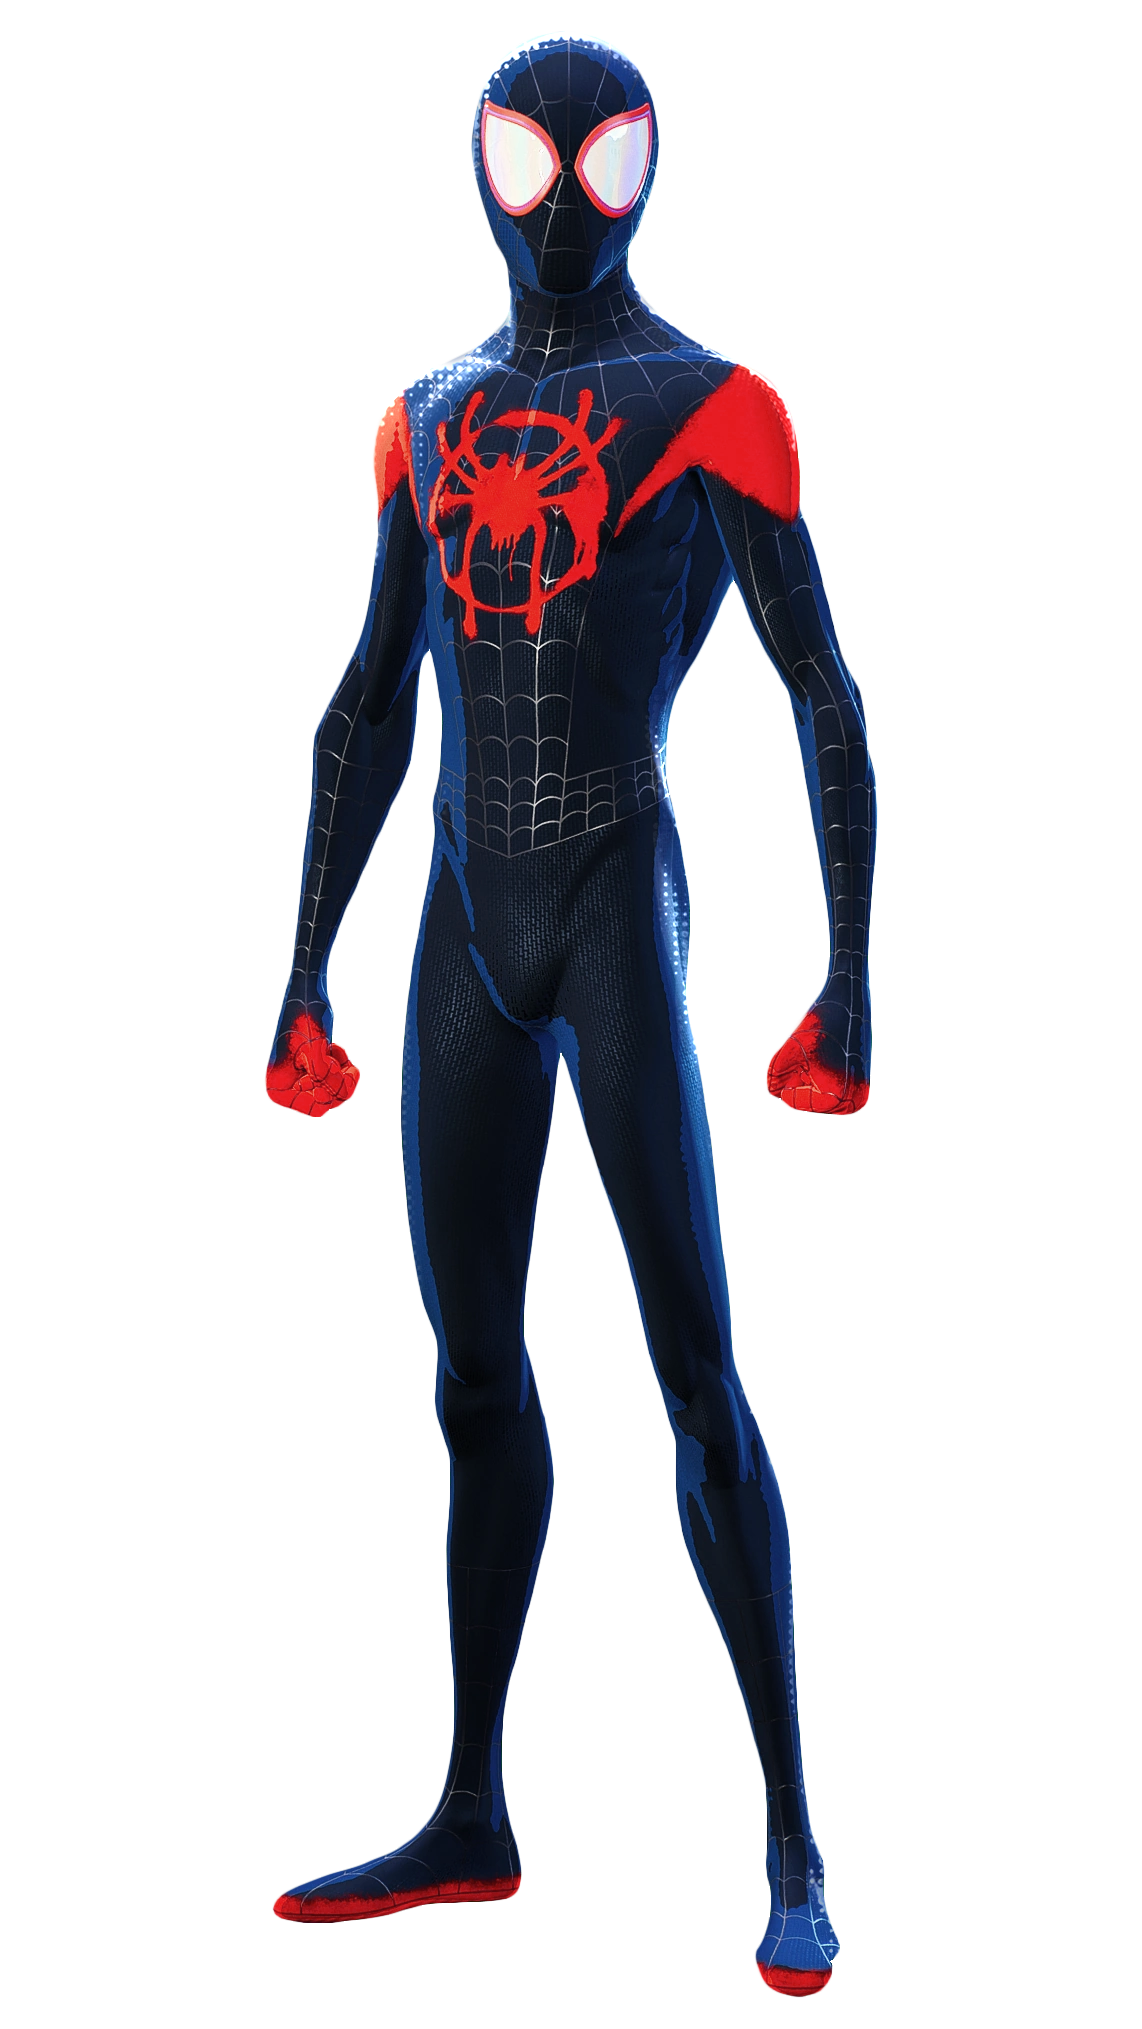 2099 Spiderman Across The Spider-Verse Jumpsuit Spandex 3D Suit Cosplay  Costume